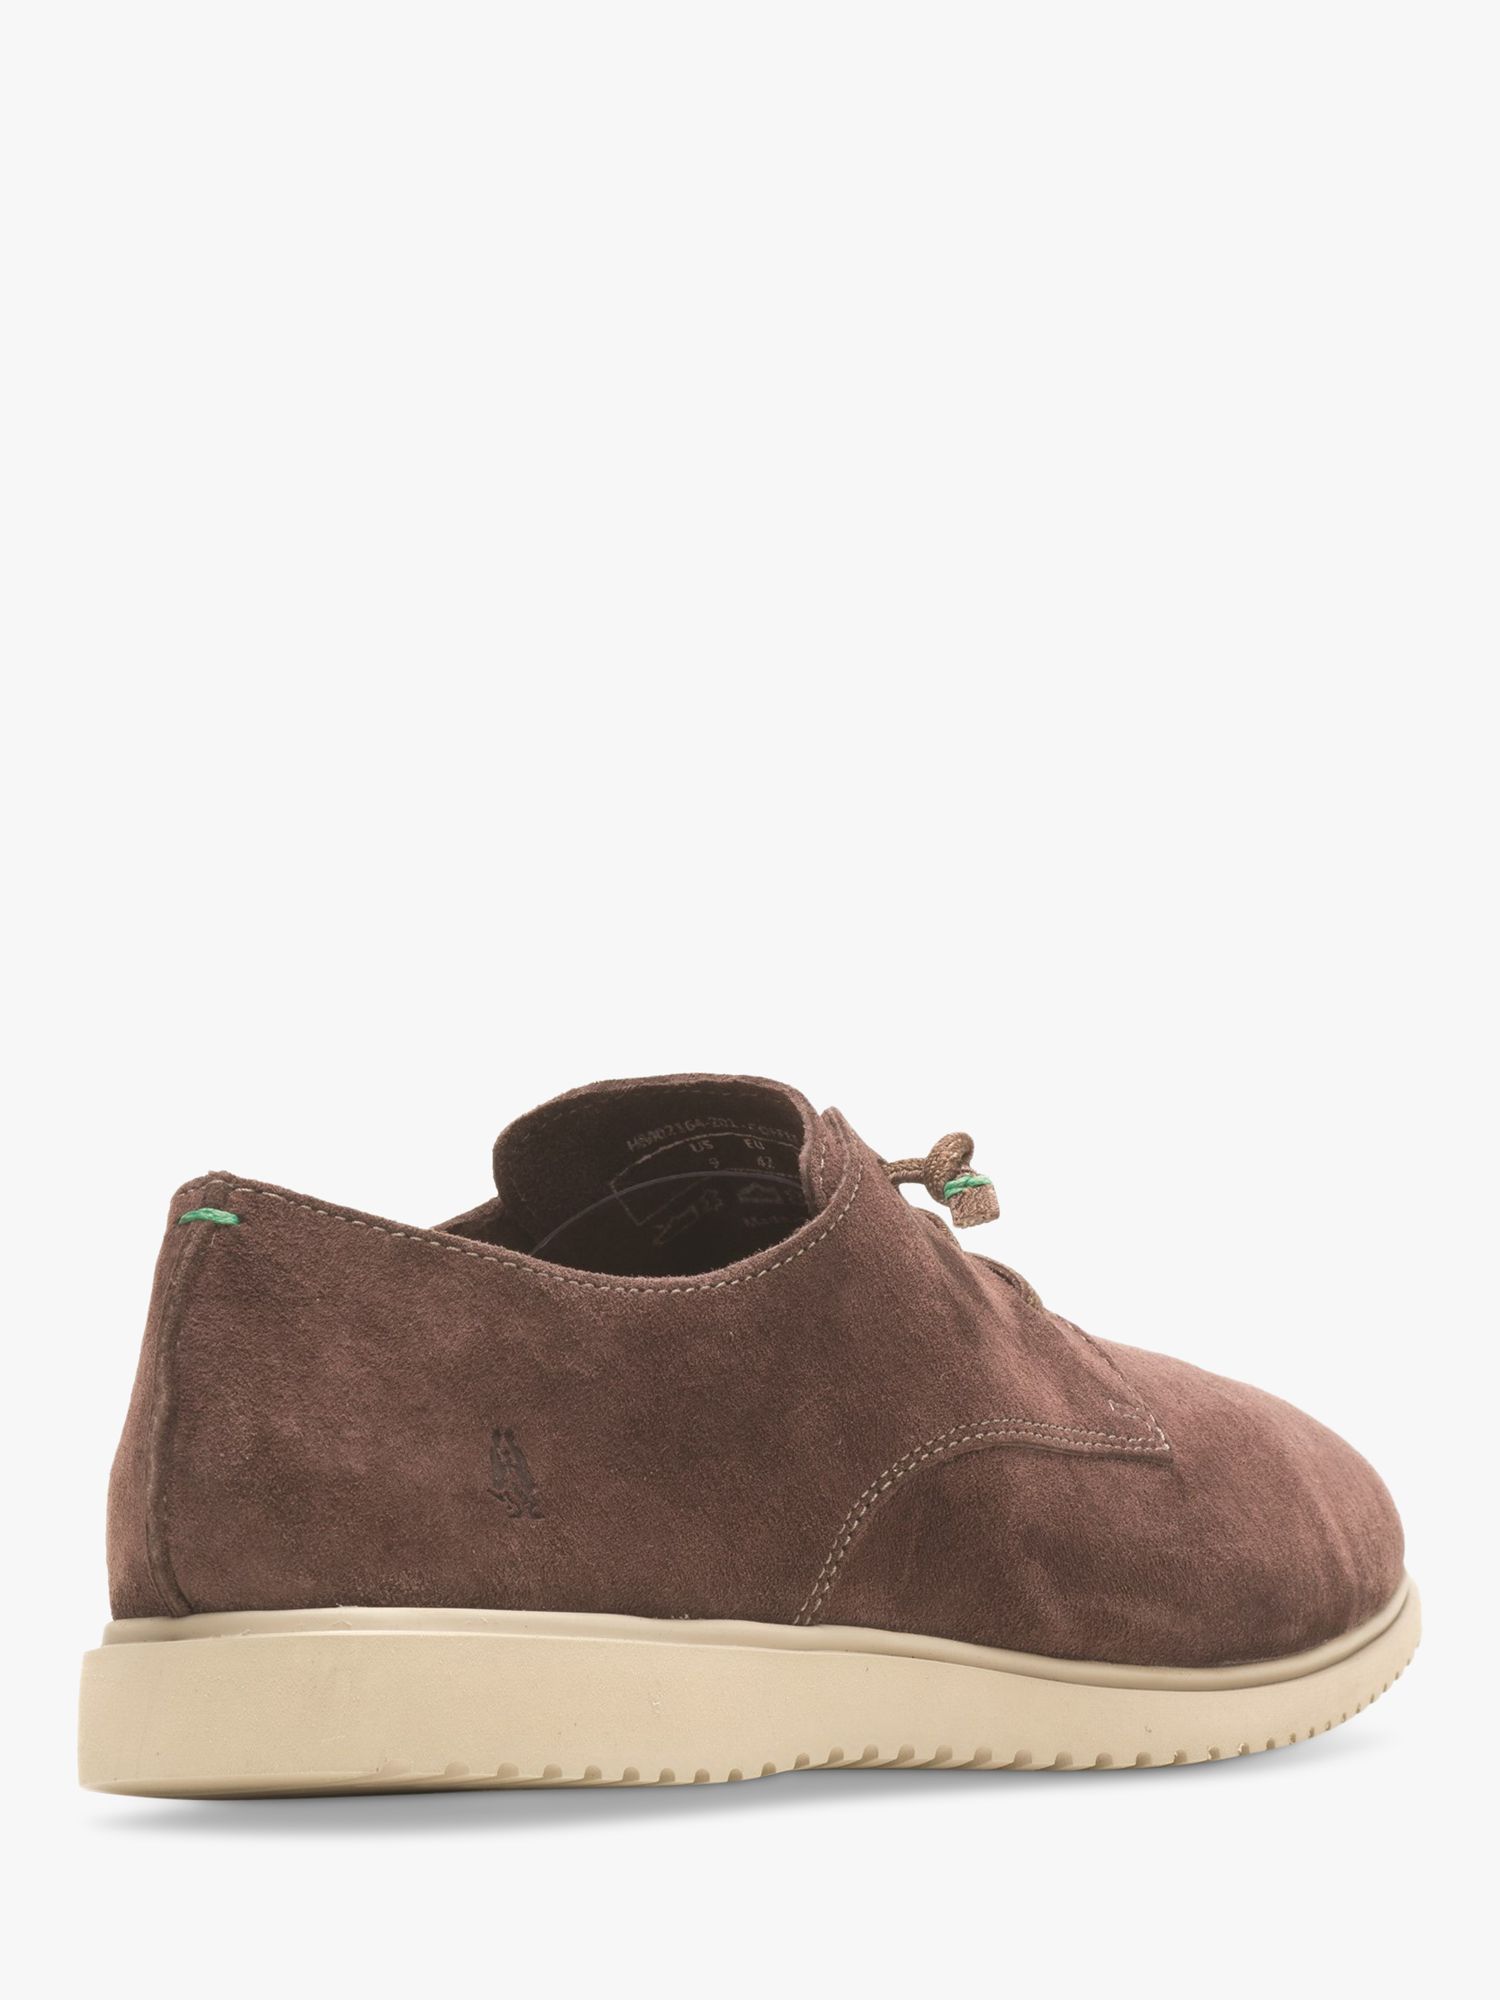 Hush Puppies Everyday Suede Leather Lace Up Trainers, Brown at John ...